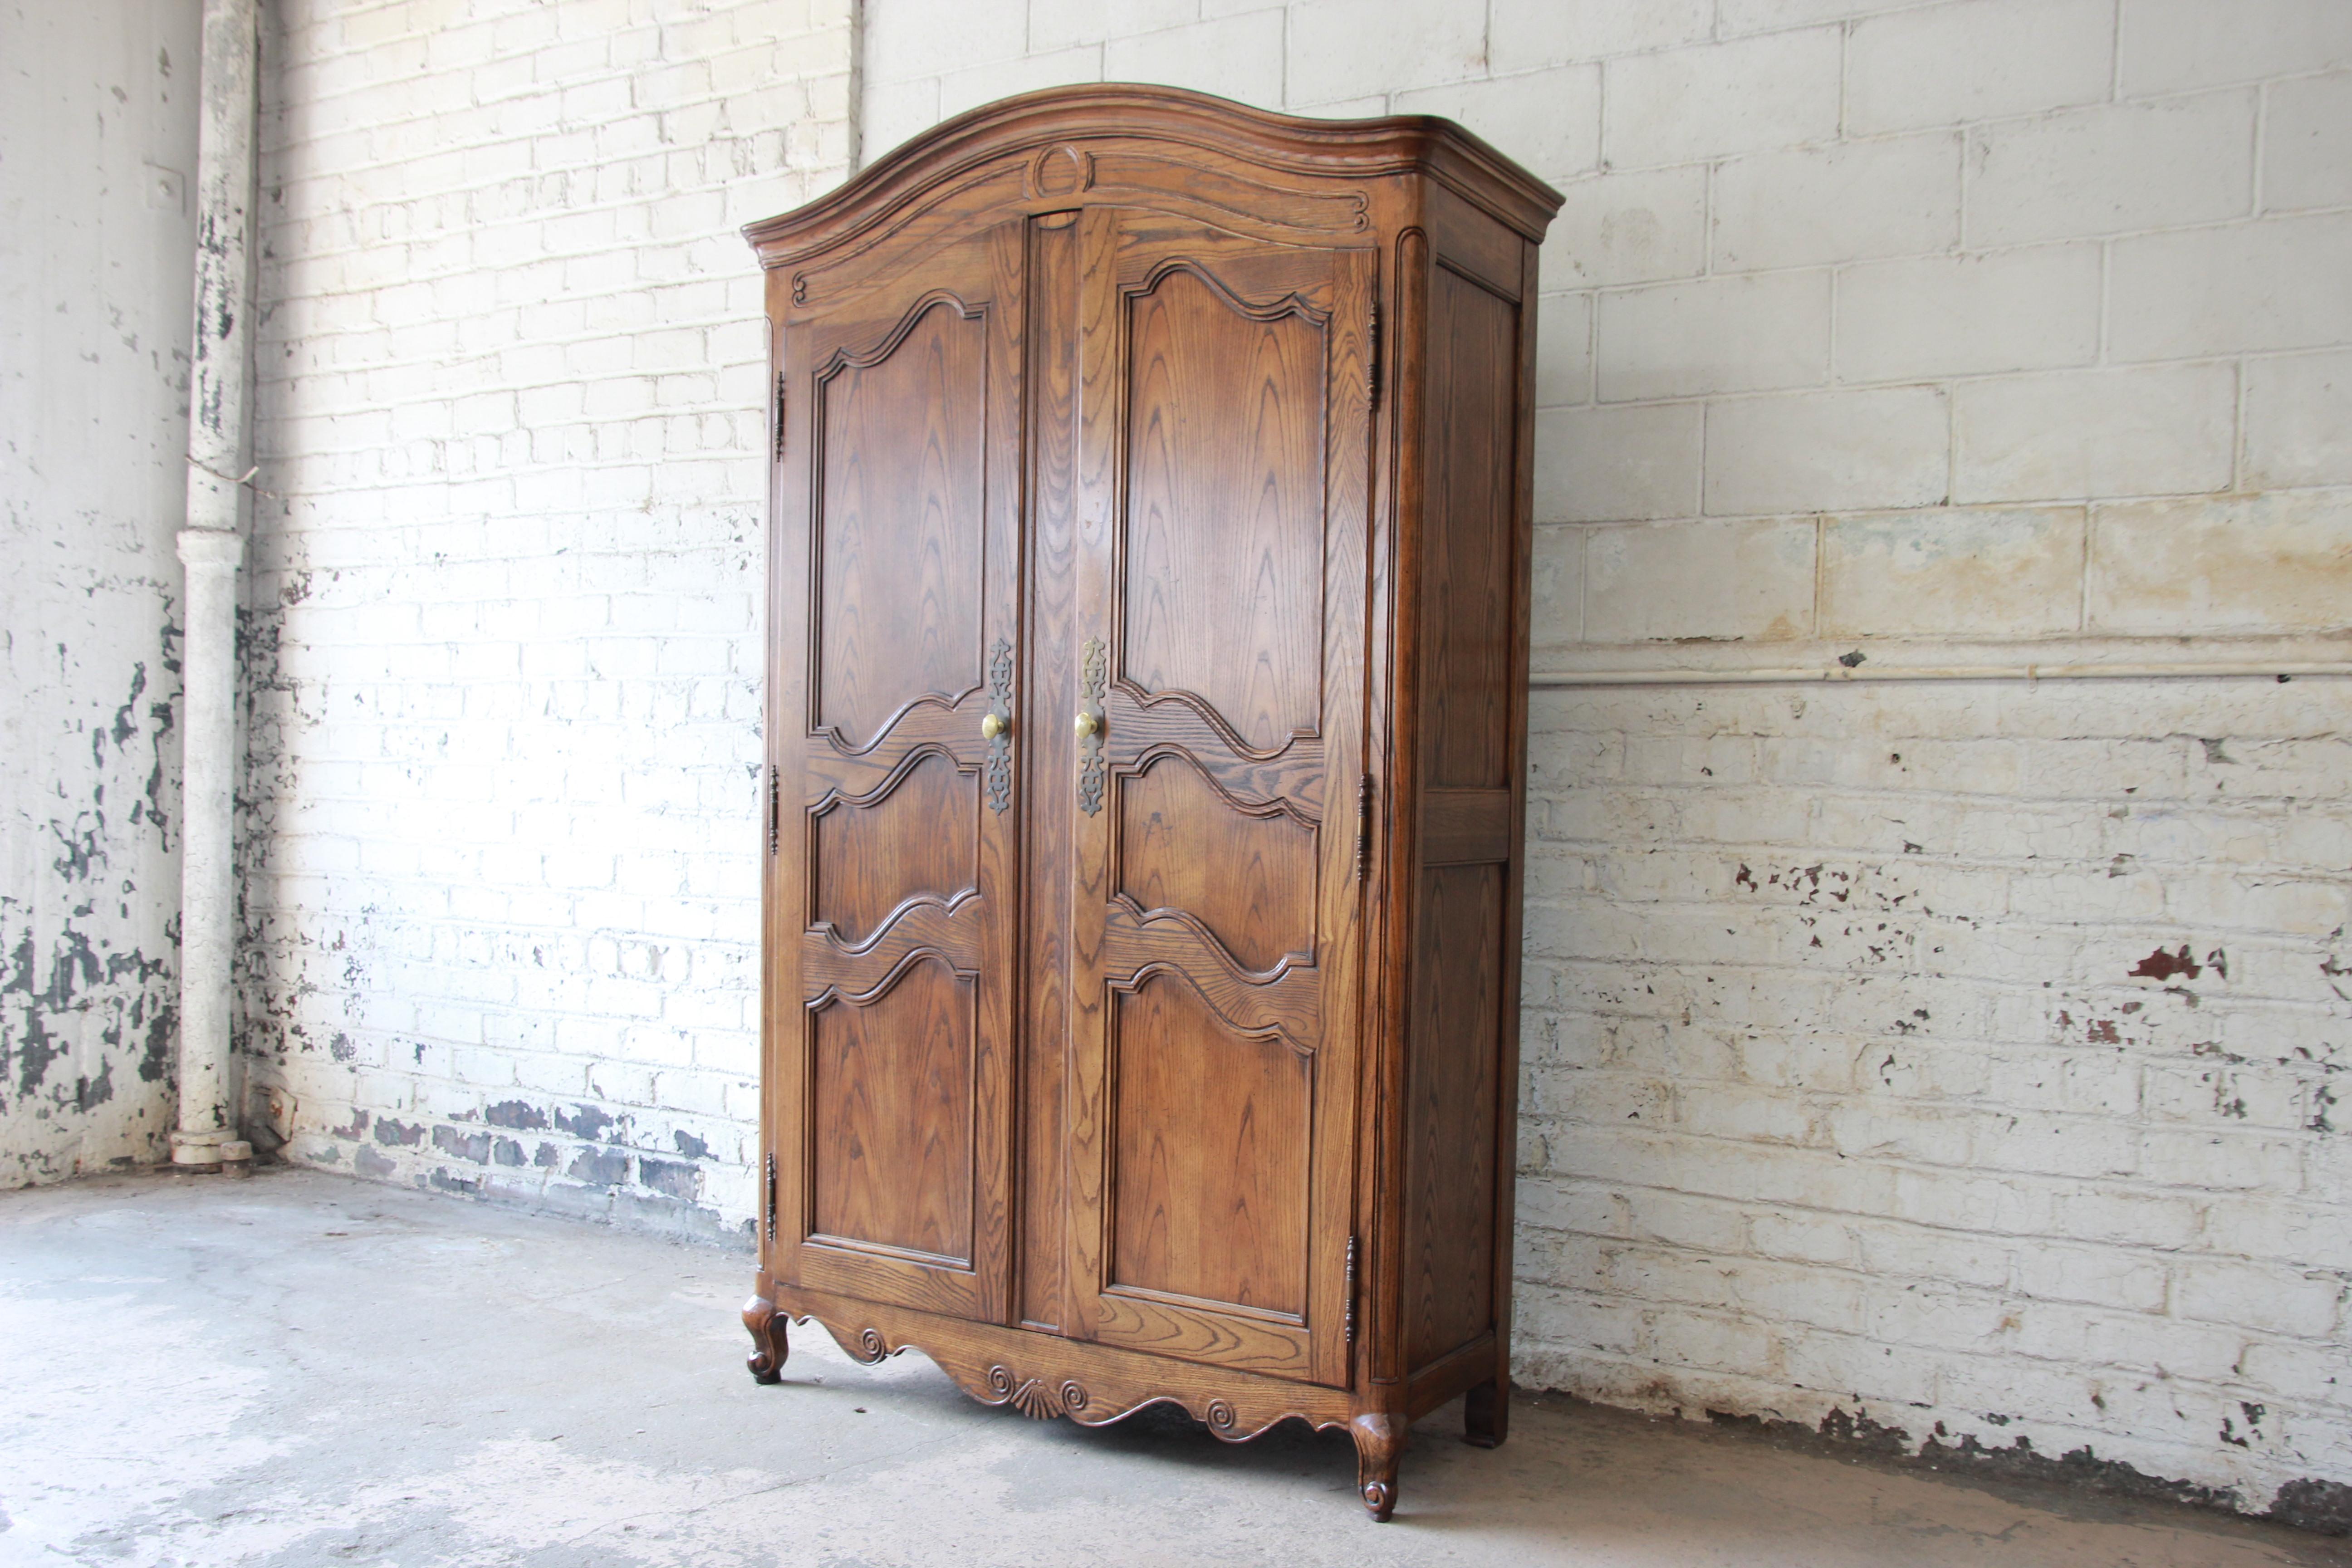 A gorgeous French Provincial Louis XV style armoire or wardrobe by Baker Furniture. The armoire features beautiful carved wood details and solid oak construction. It offers ample room for storage, with three open shelves, three cubbies, and three